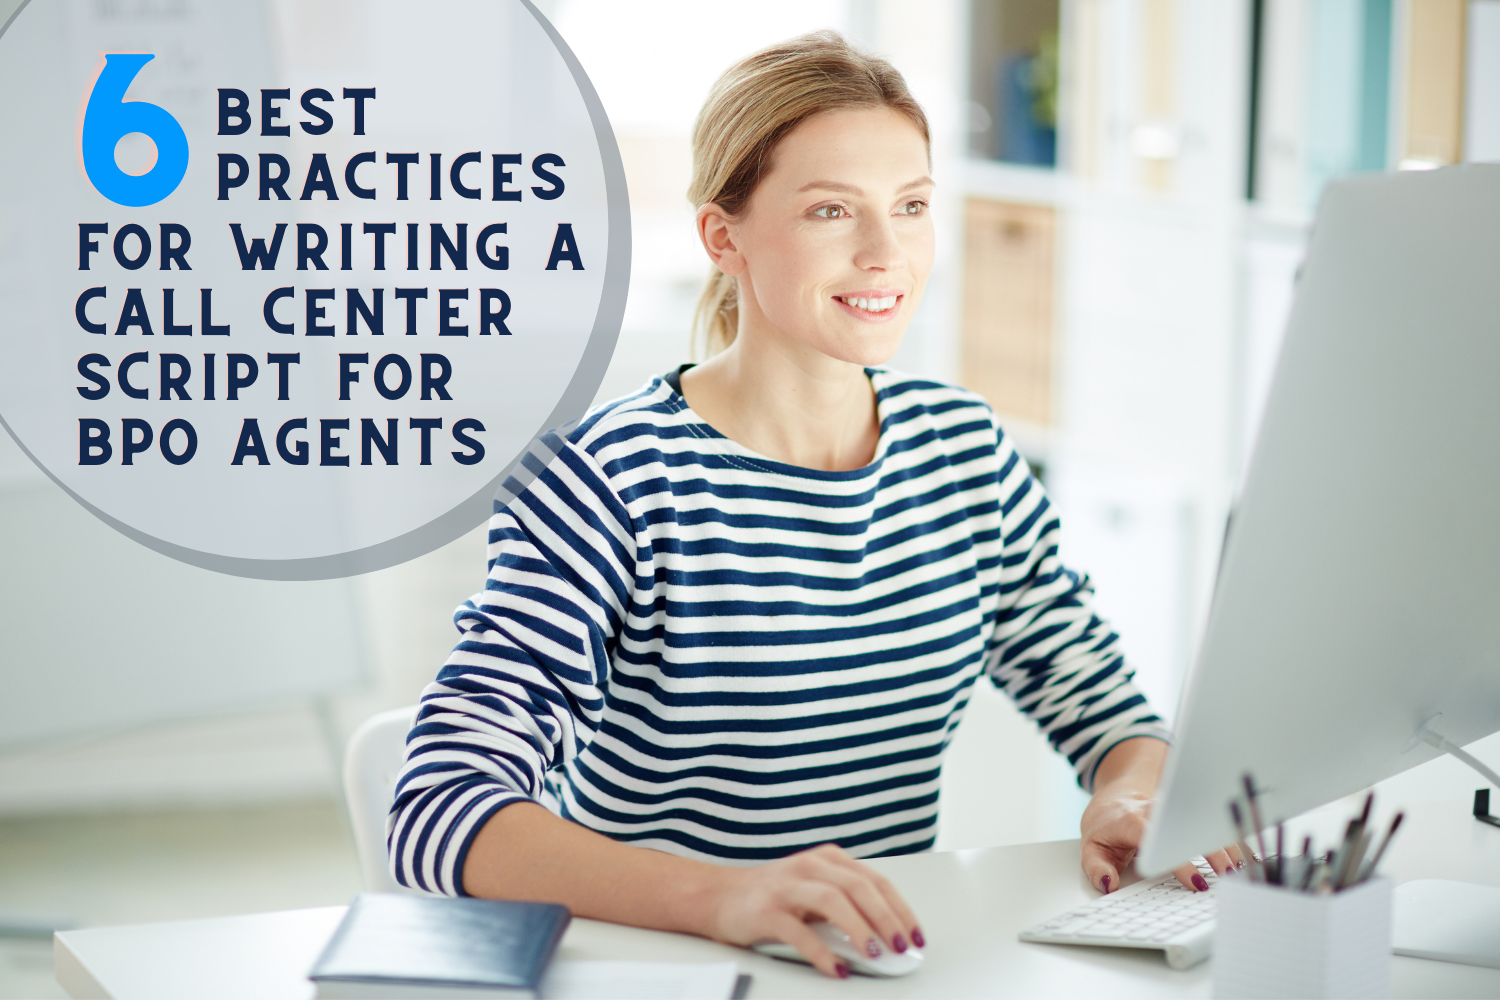 6 Best Practices For Writing a Call Center Script For BPO Agents